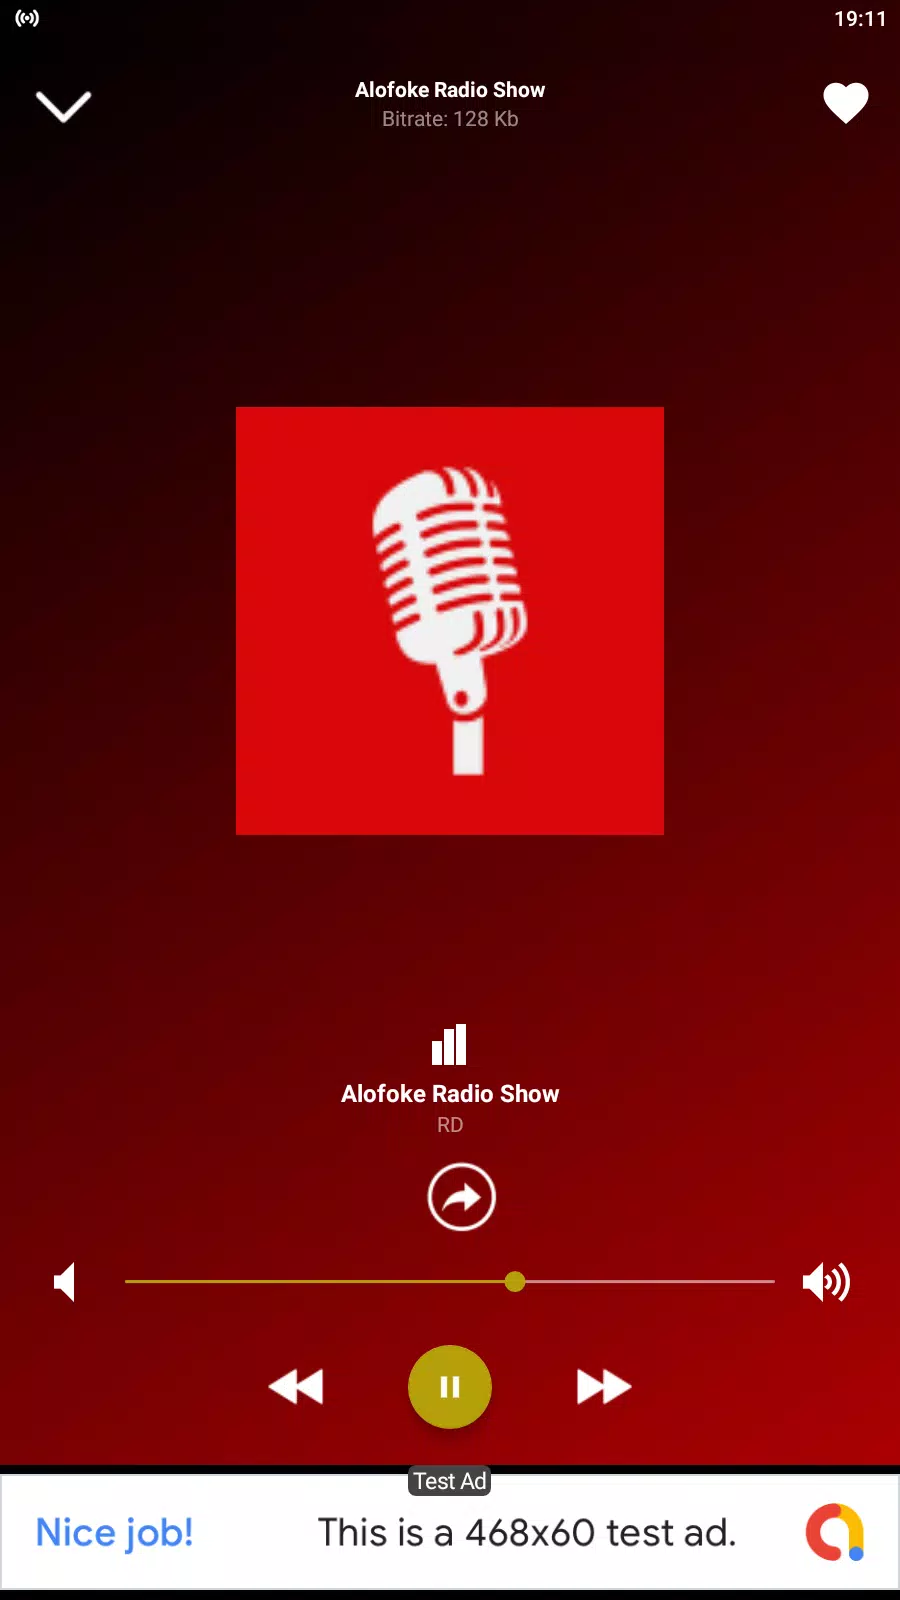 Alofoke radio show App RD for Android - APK Download